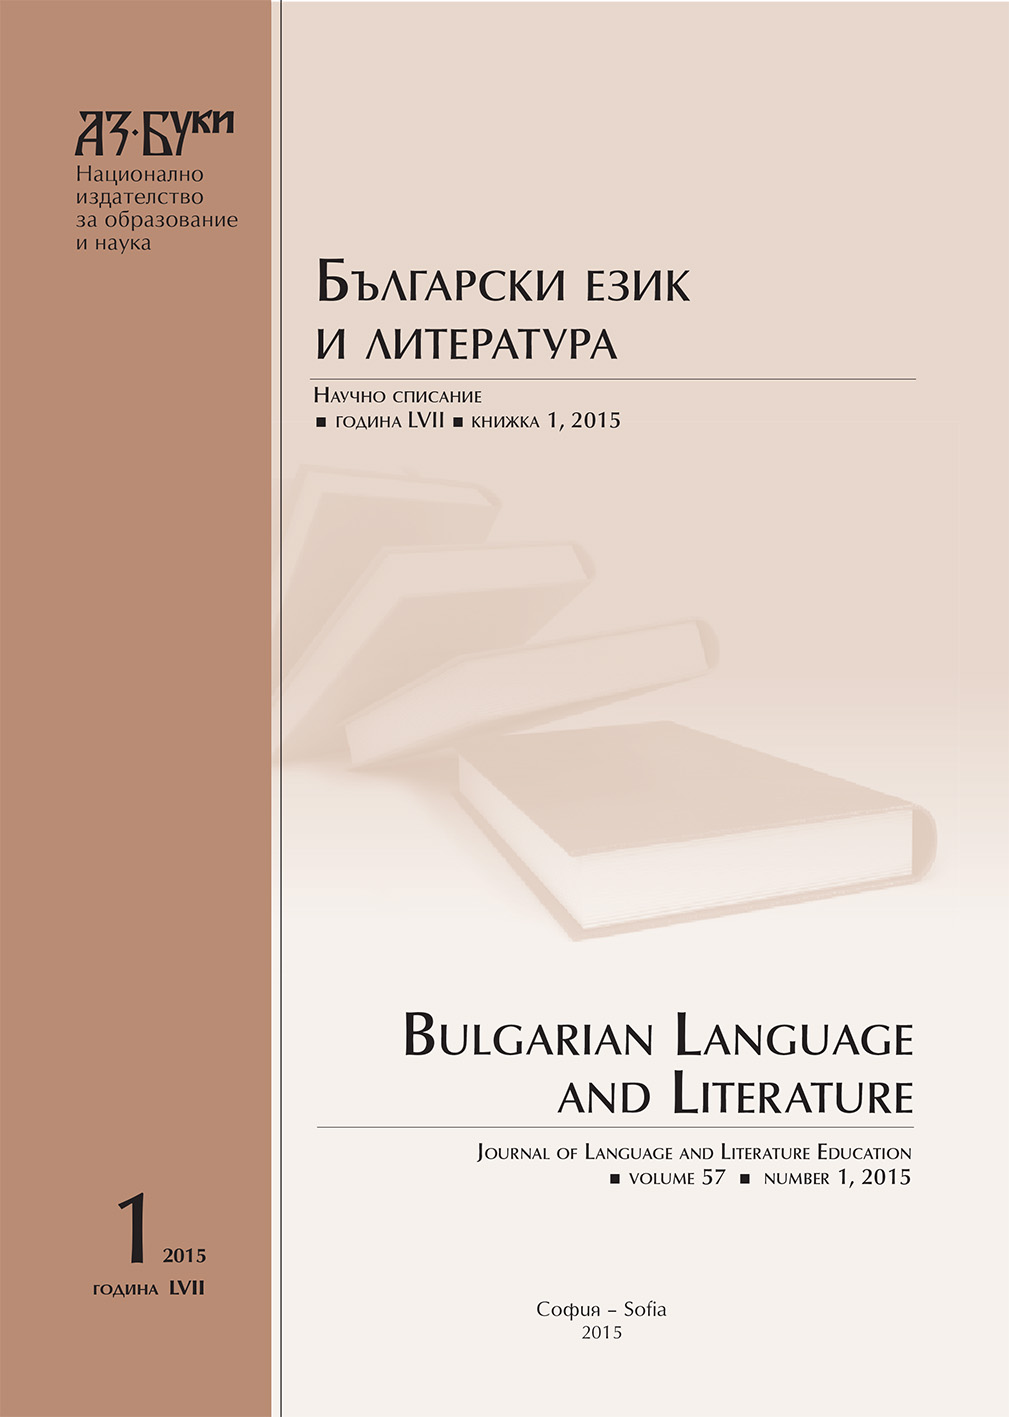 Project Based Bulgarian Language and Literature Learning Cover Image